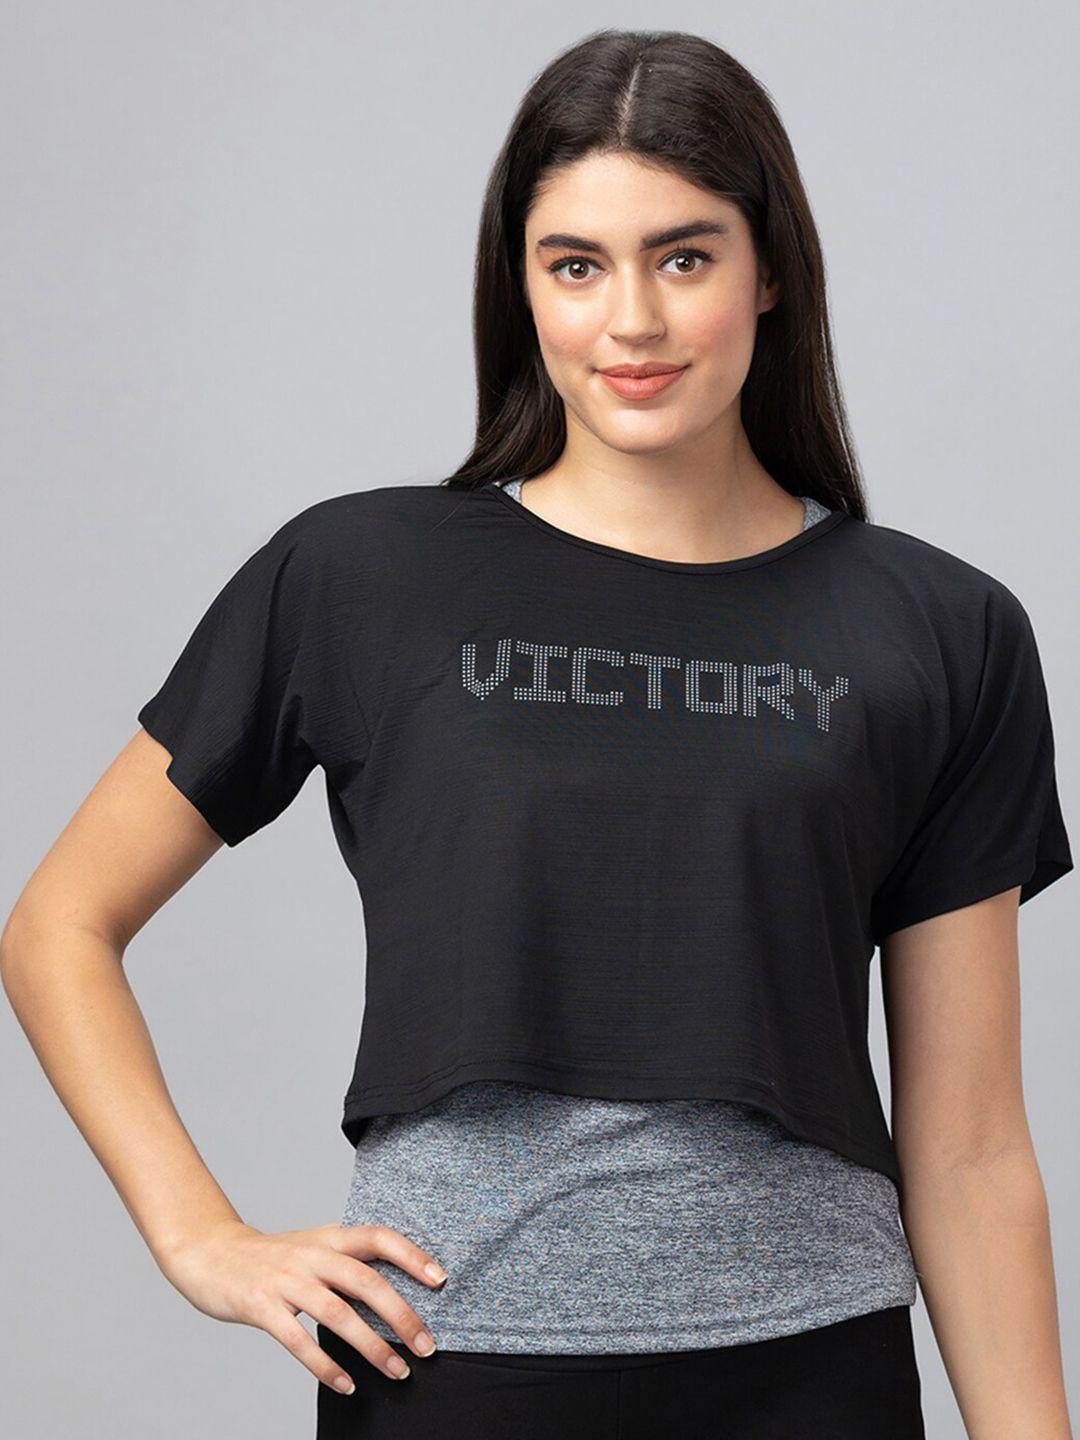 globus-typography-printed-extended-sleeves-boxy-crop-pure-cotton-t-shirt